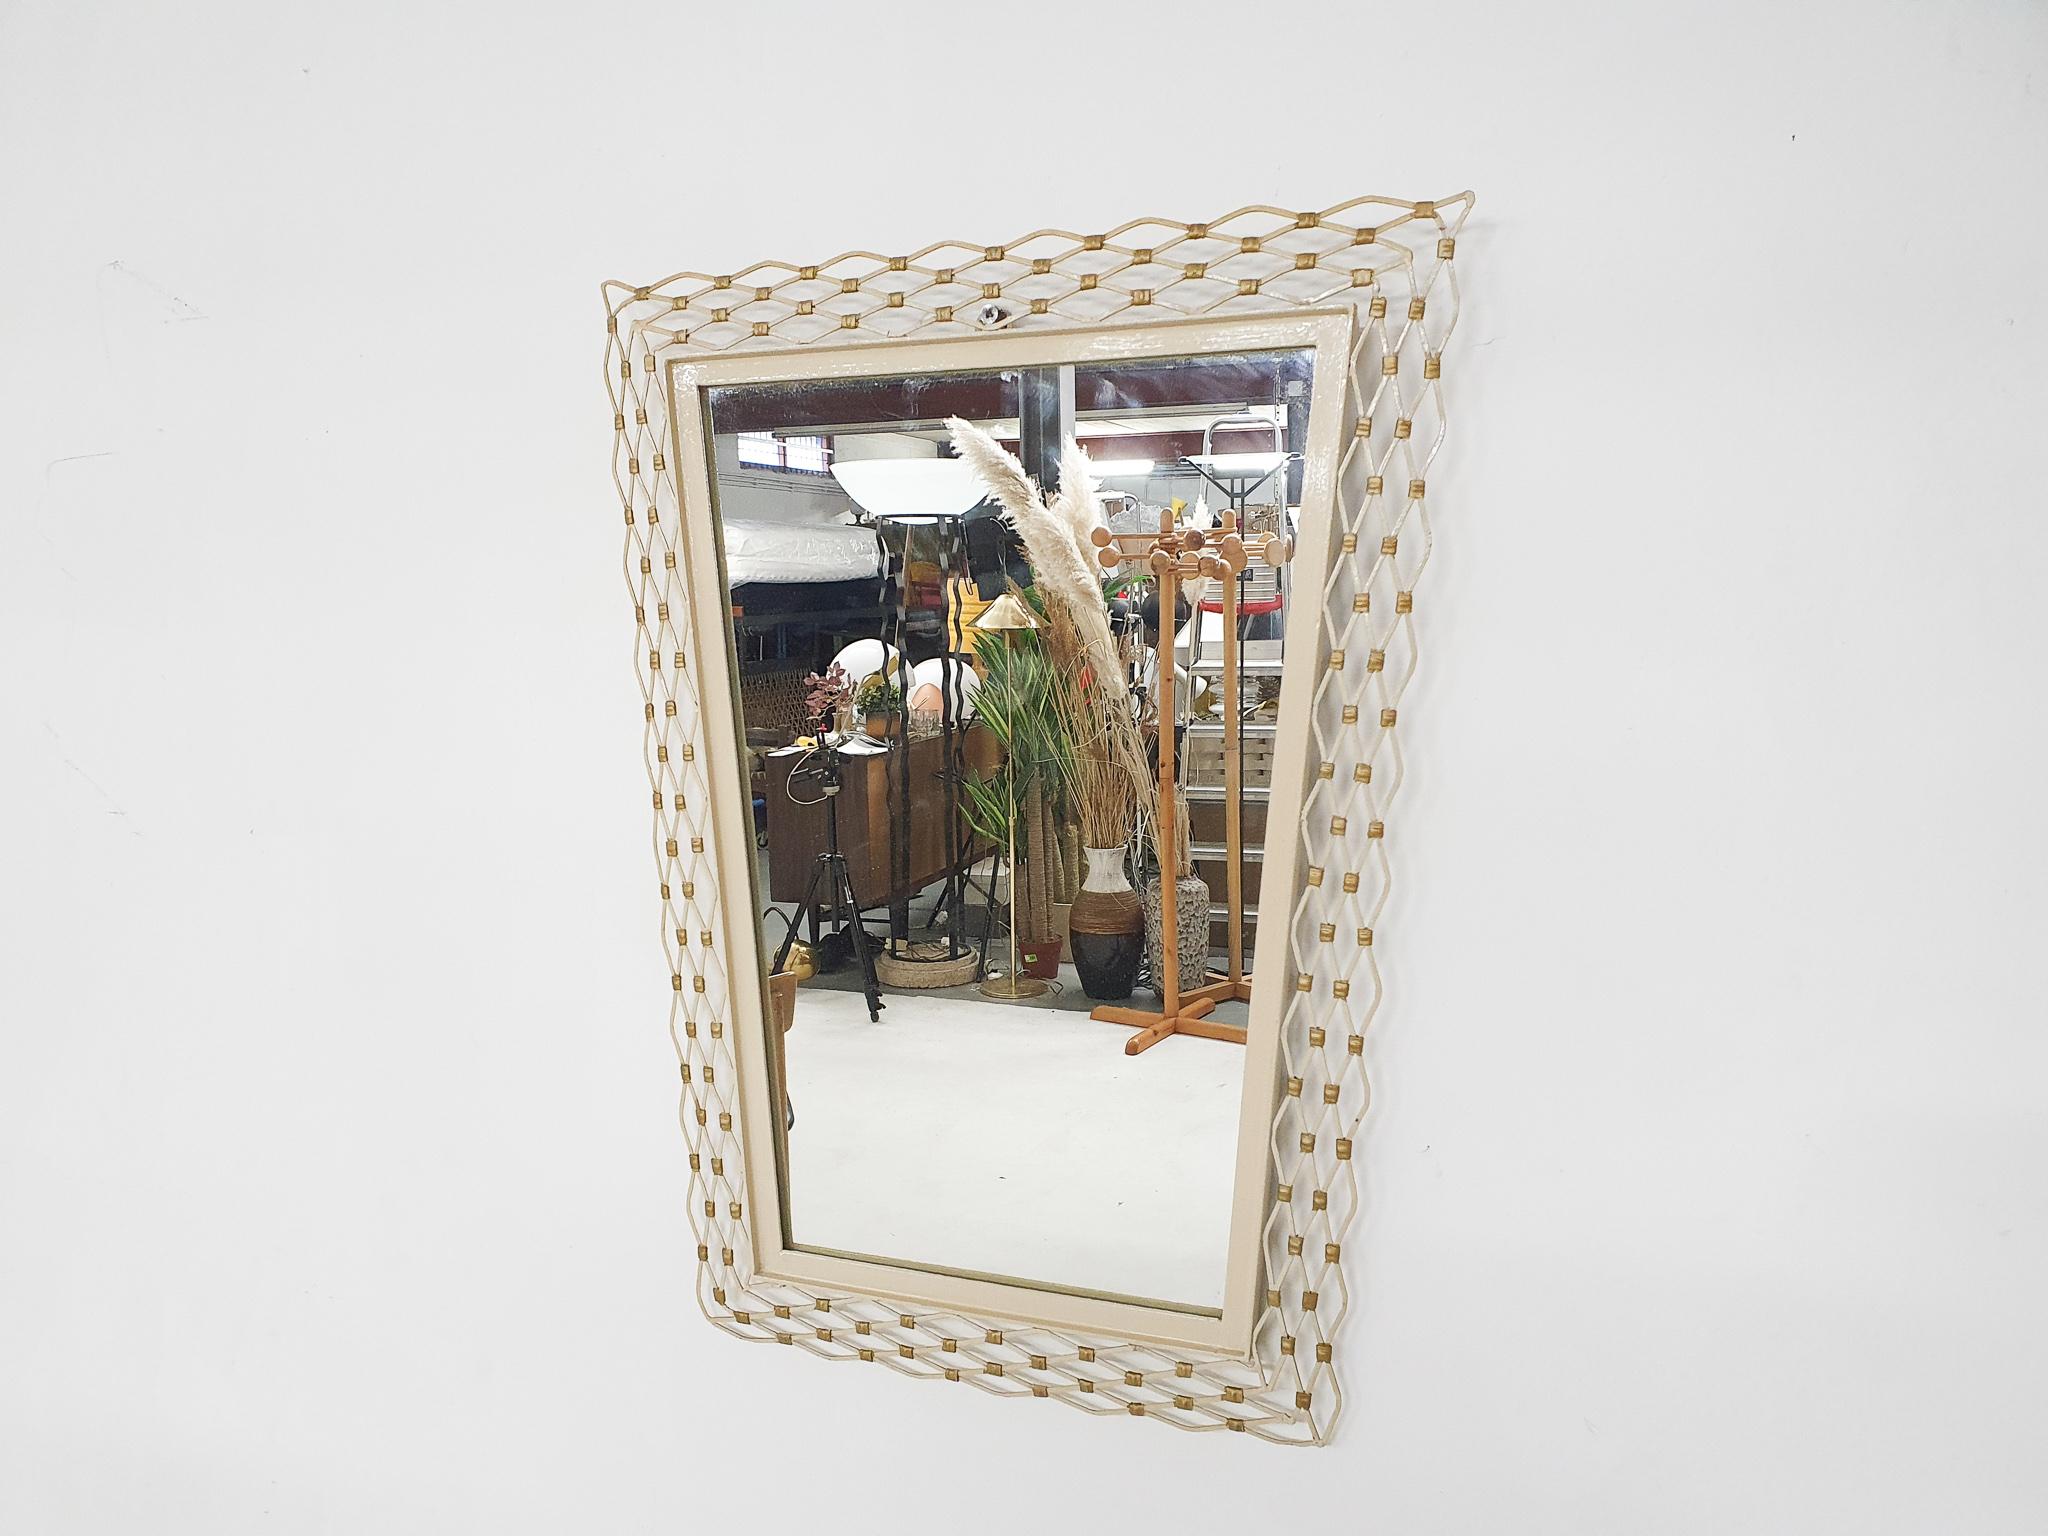 White and gold metal mirror.
The glass of the mirror has a chip missing, but it is only visible in the back.